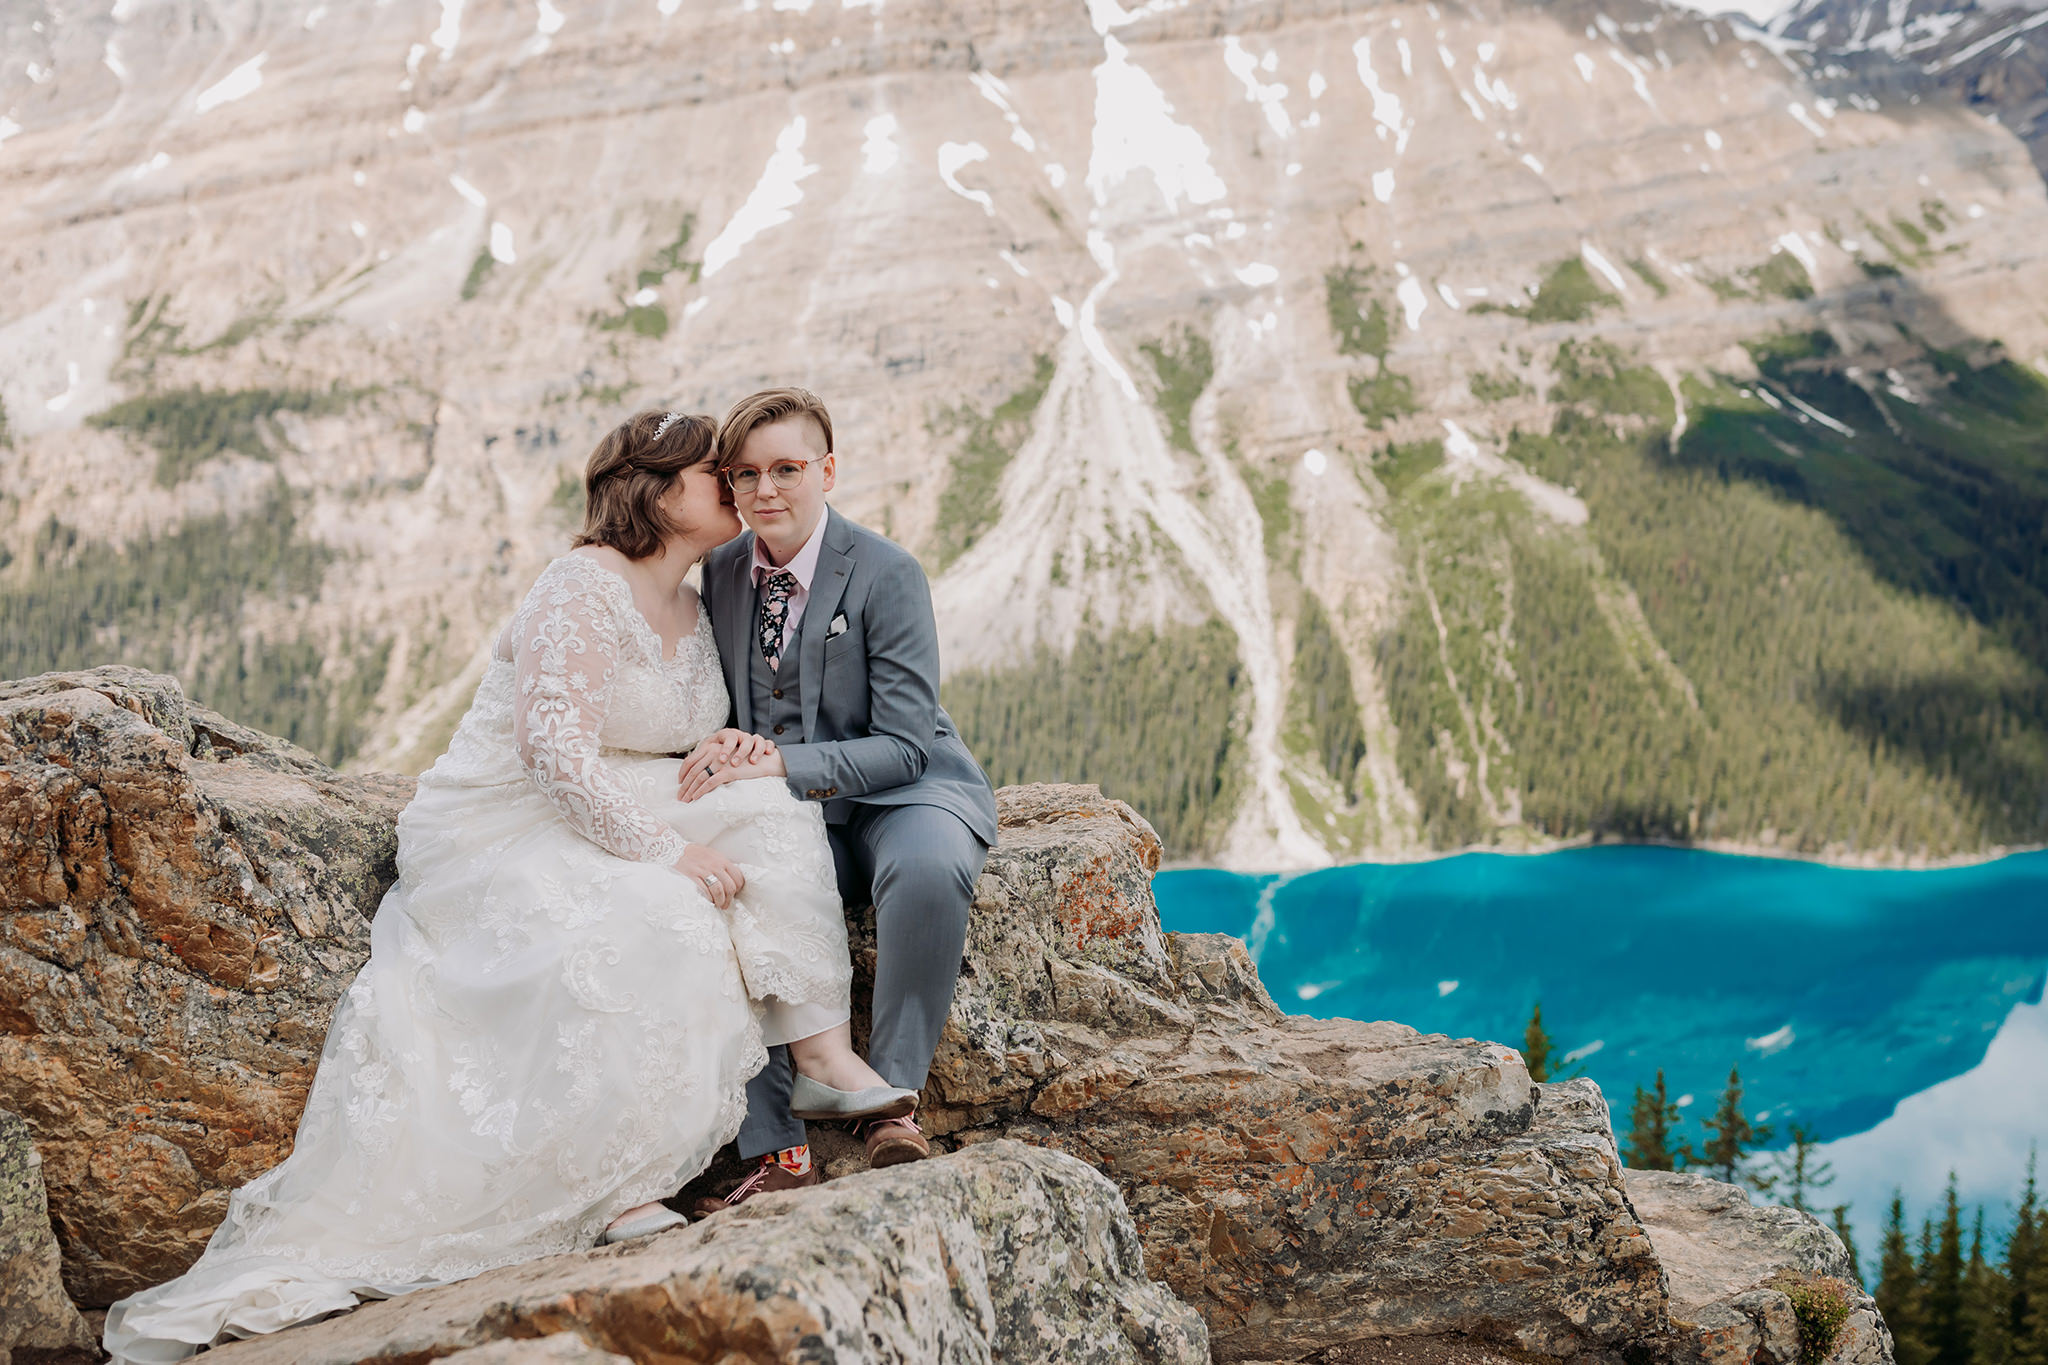 Post-wedding portraits rocky viewpoint at Peyto Lake. same-sex wedding. Mountain Wedding portraits photographed by ENV Photography. Gay friendly. LGBTQ friendly wedding & elopement photographer.